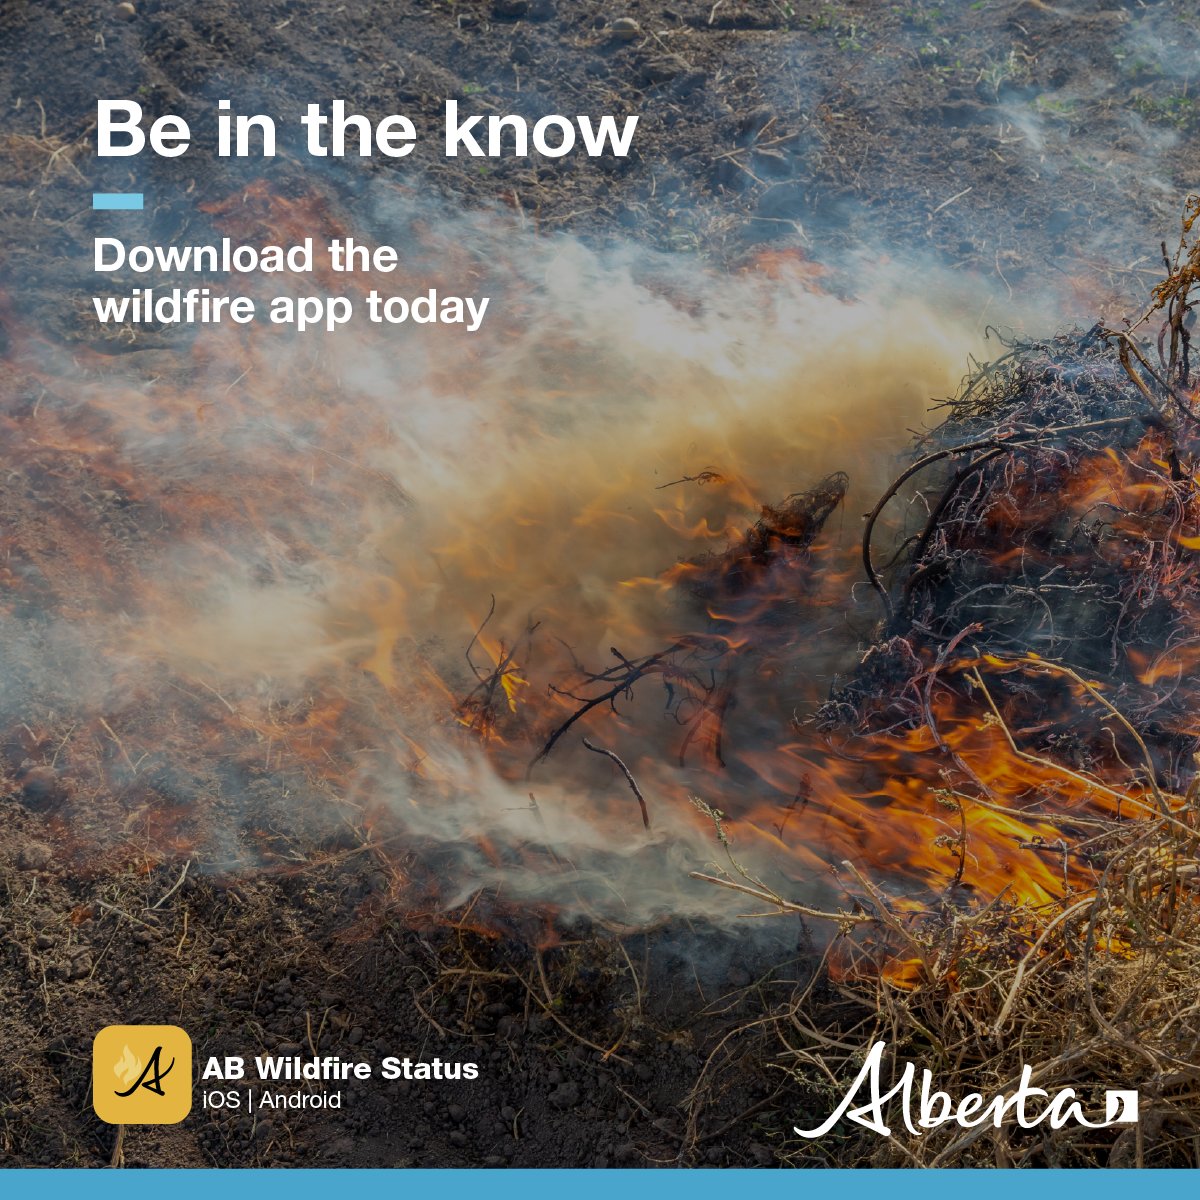 Wildfire season is here. Stay informed of wildfires near you, sign up for forest area updates and more by downloading the AB Wildfire Status app. Android play.google.com/store/apps/det…... Apple apps.apple.com/.../ab-wildfir…